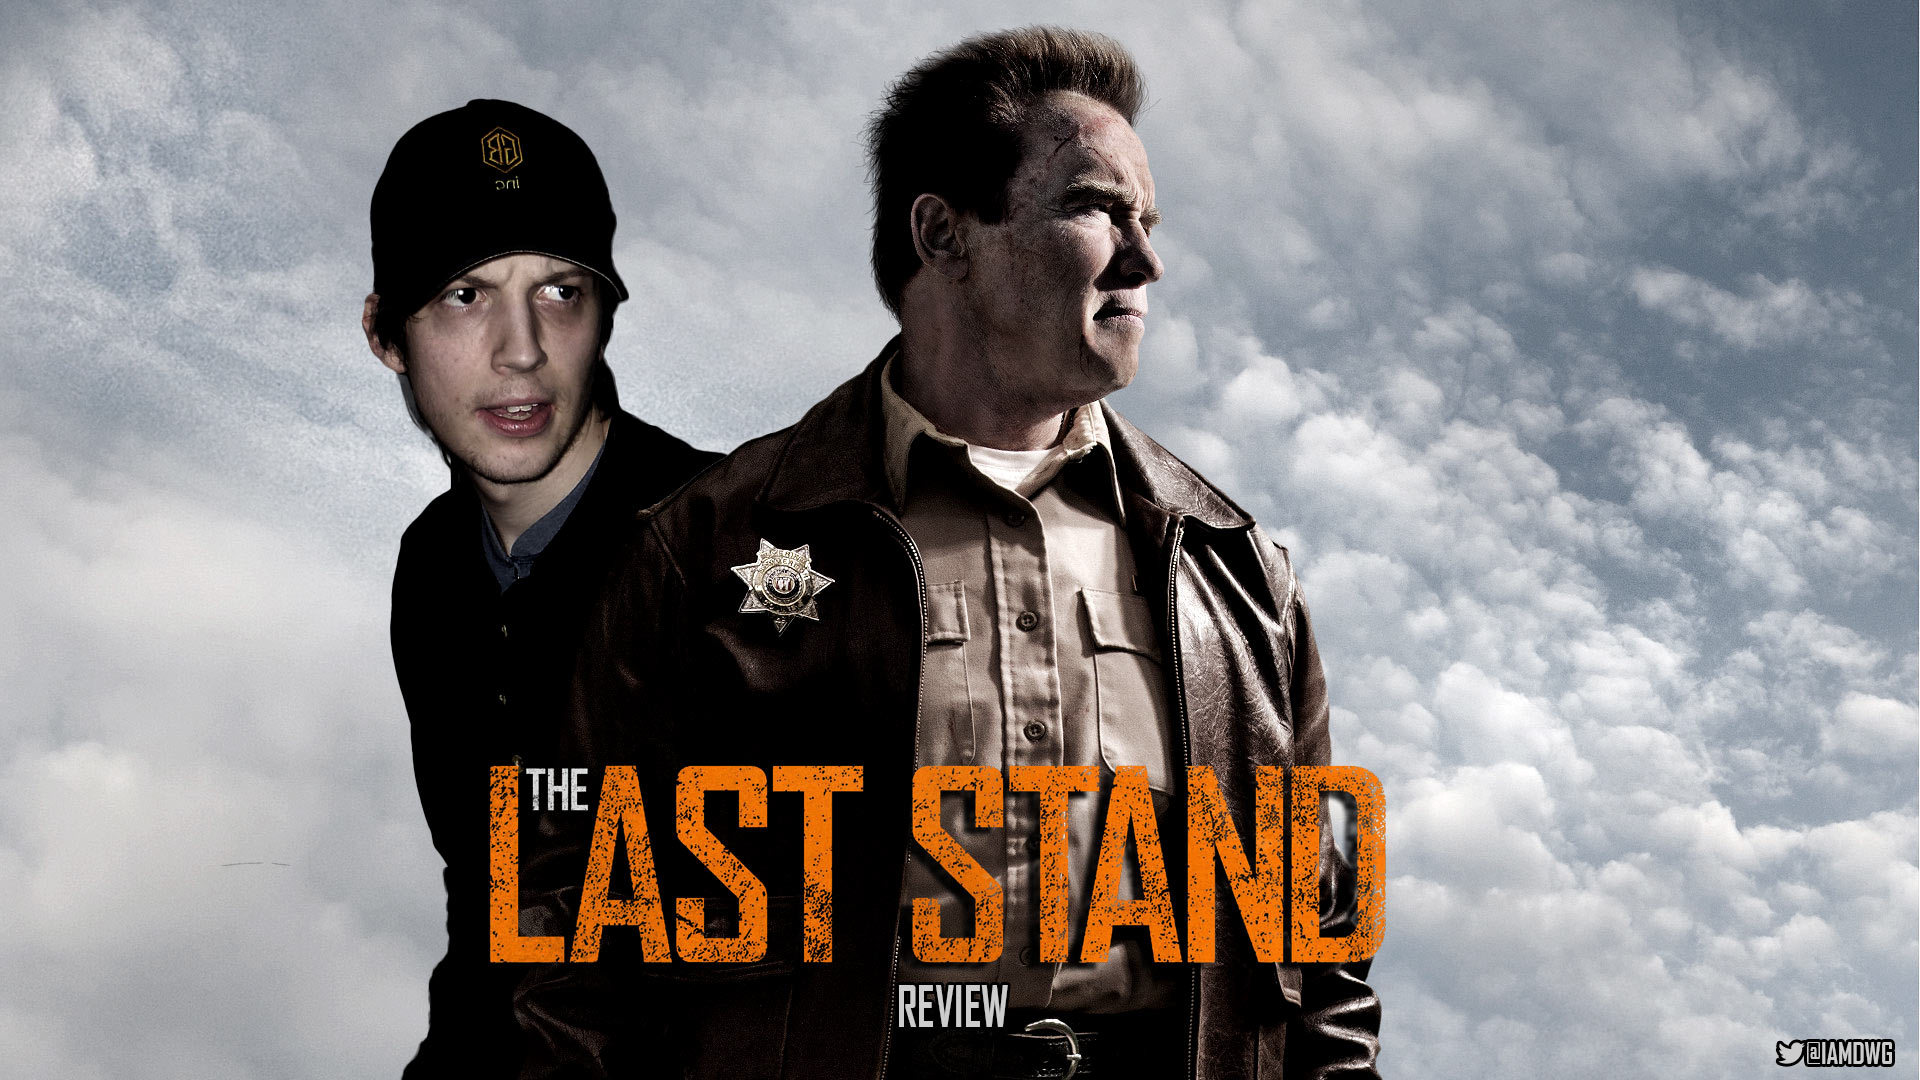 The last stand union city weebly hacked: software, free download pc